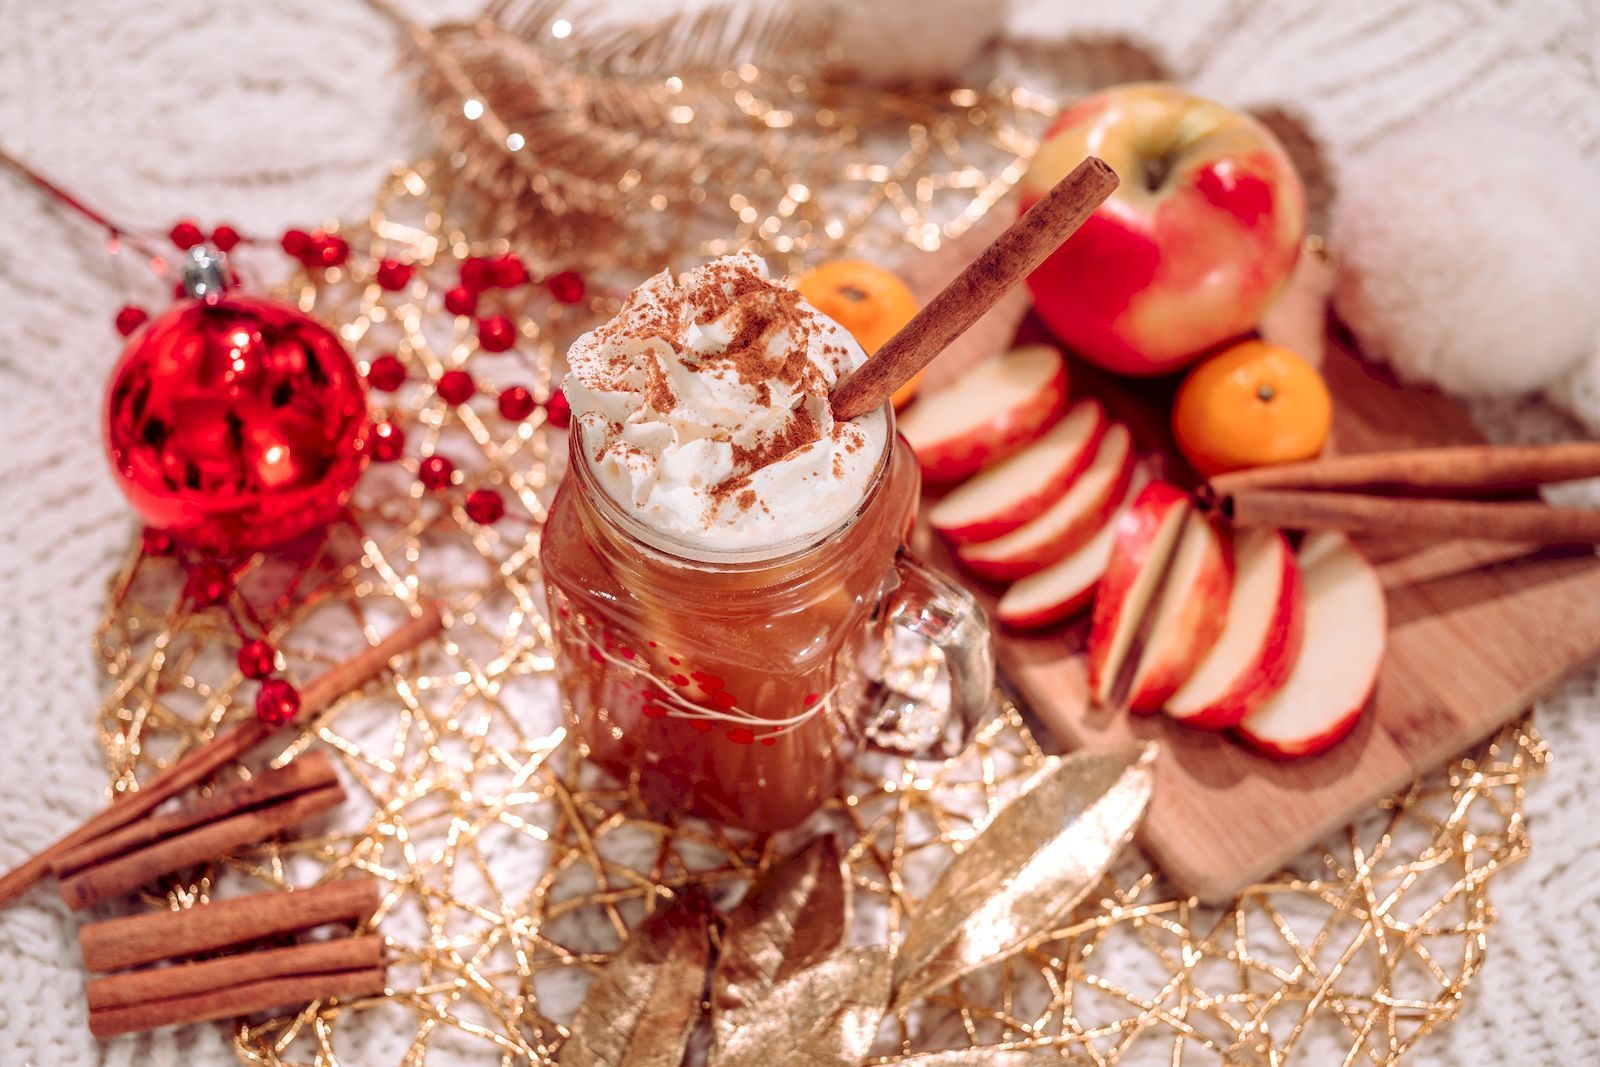 End the year with these delicious festive treats